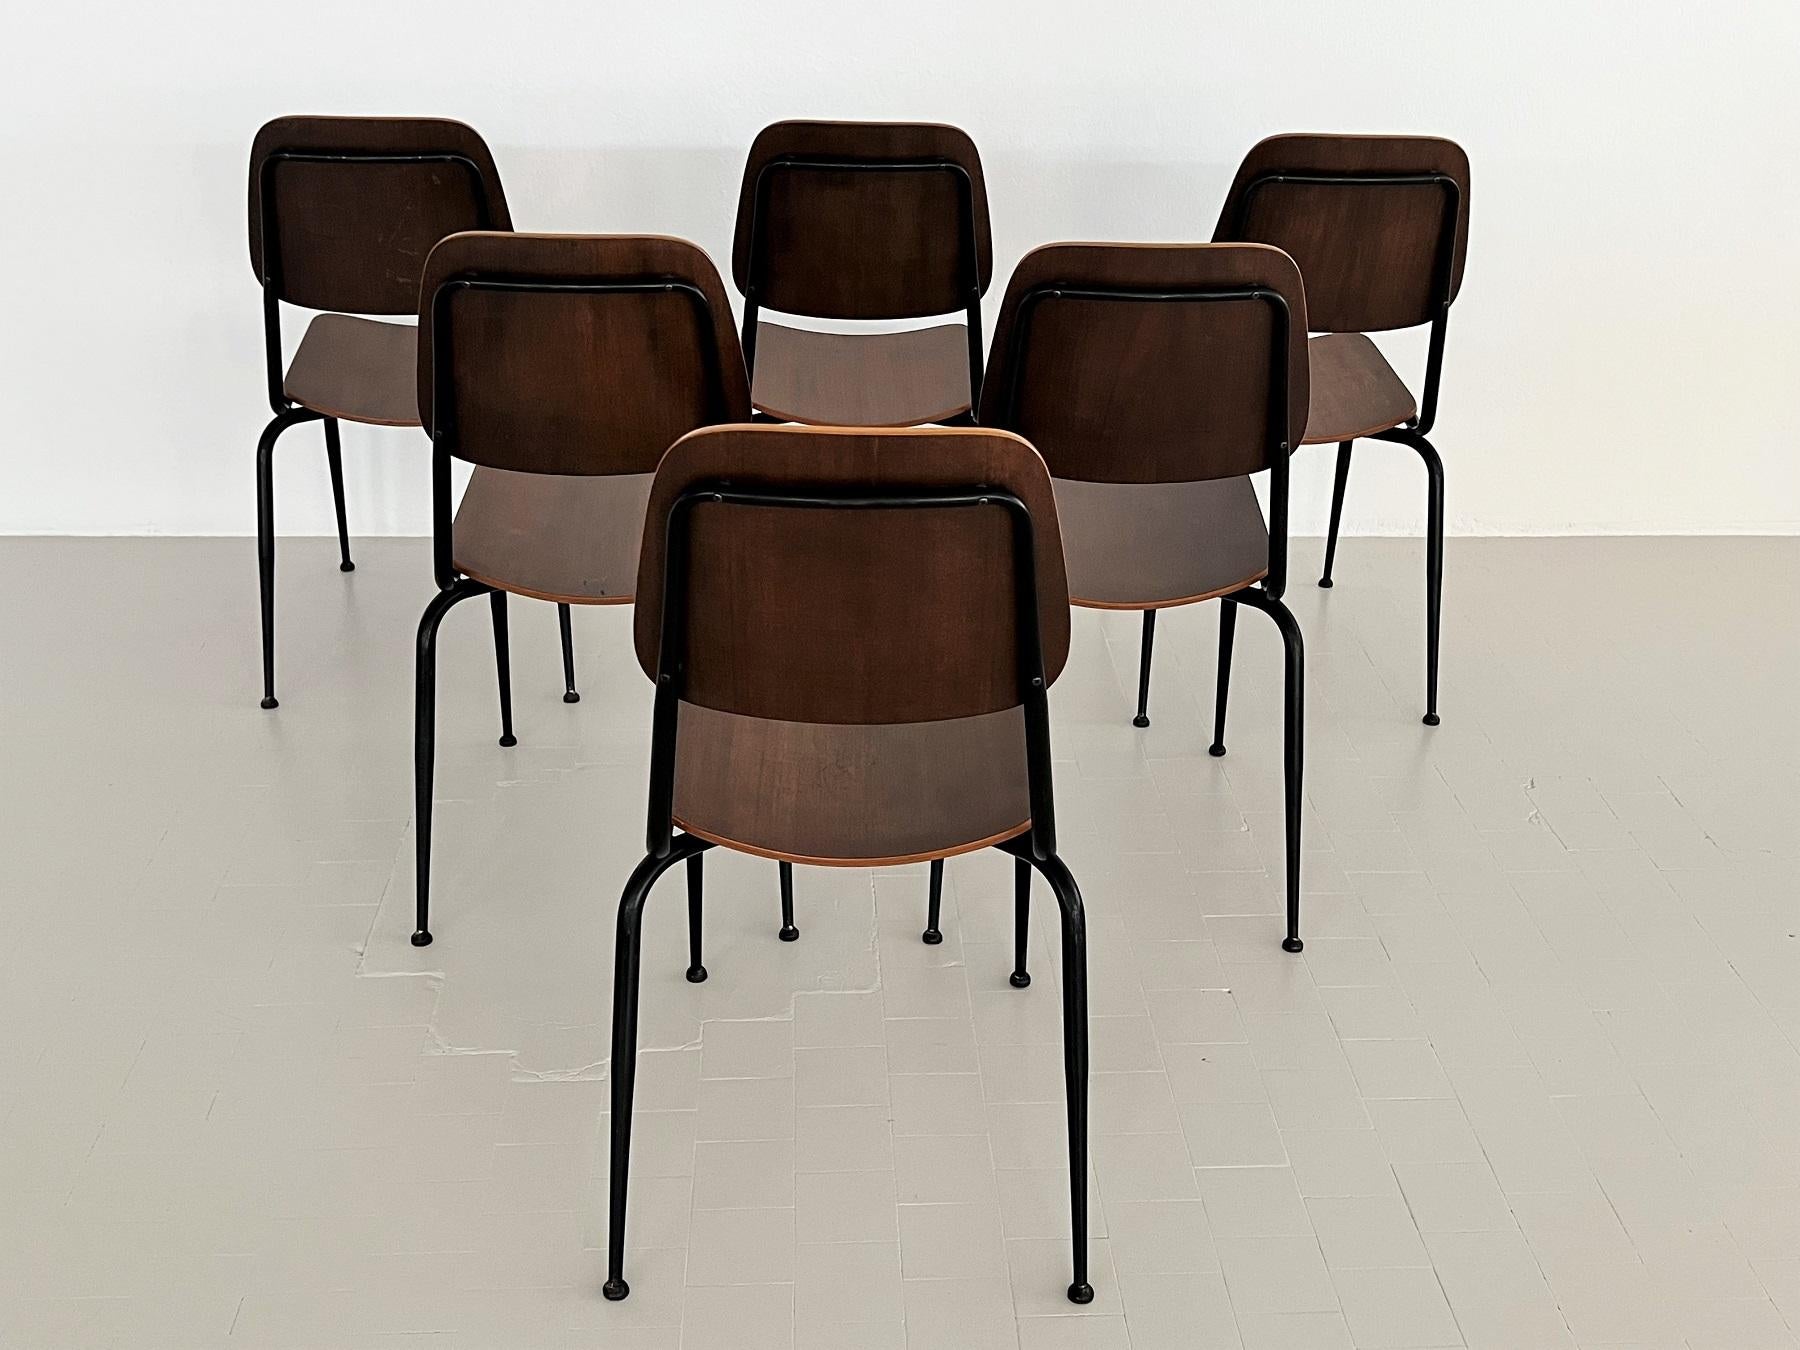 Mid-20th Century Italian Mid-Century Plywood Nutwood Chairs by Velca Legnano, 1960s For Sale